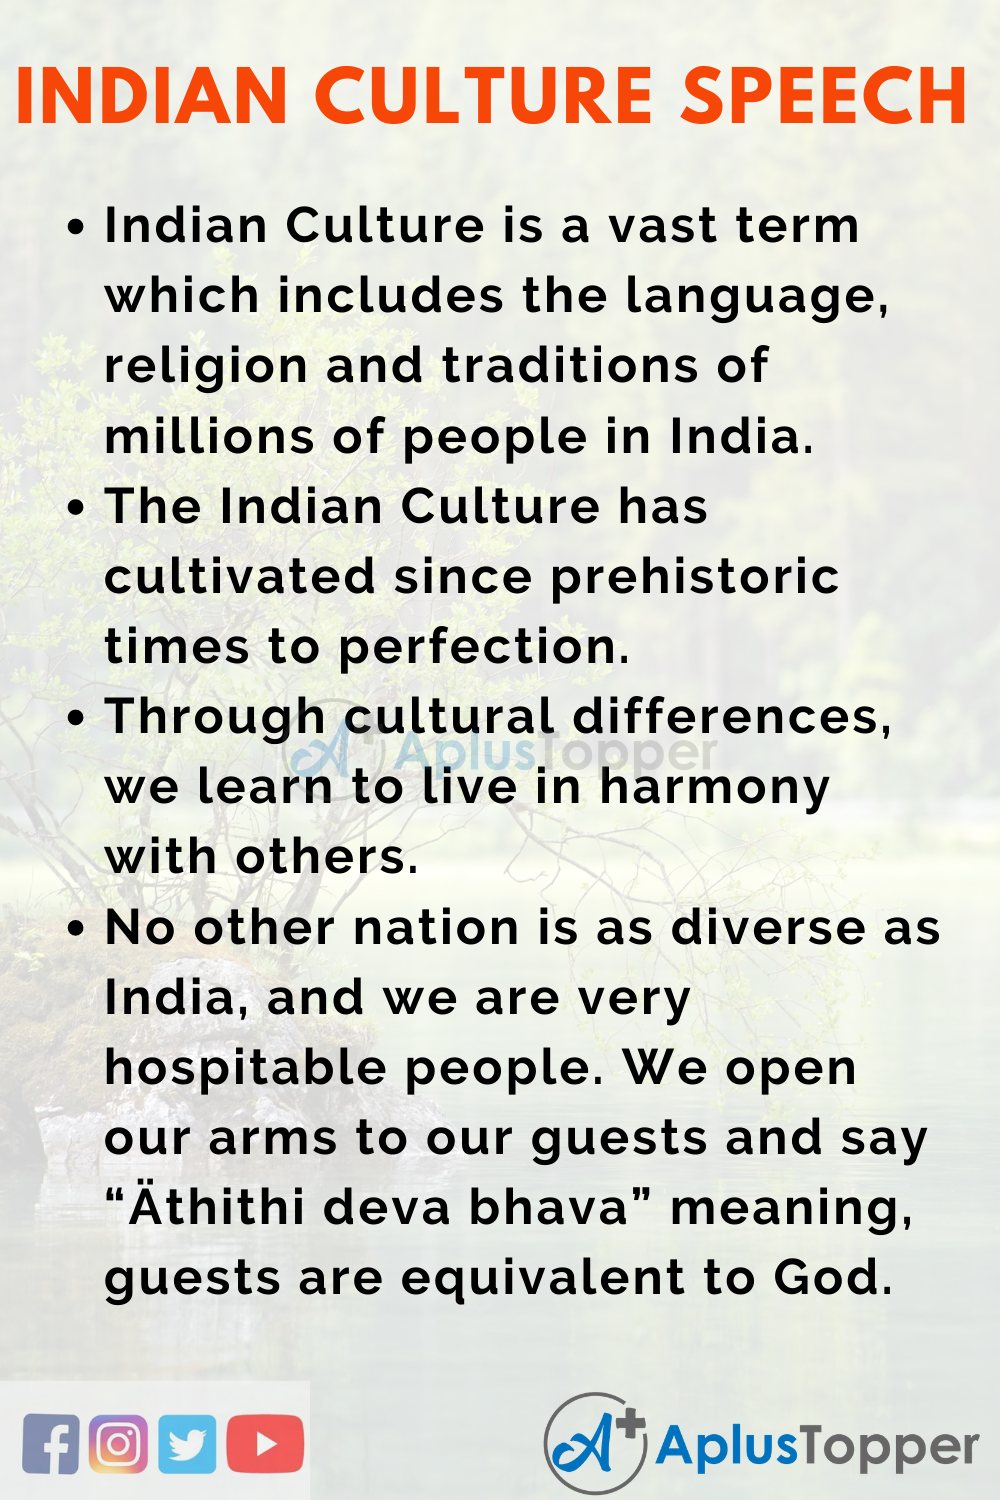 essay on cultural differences across india